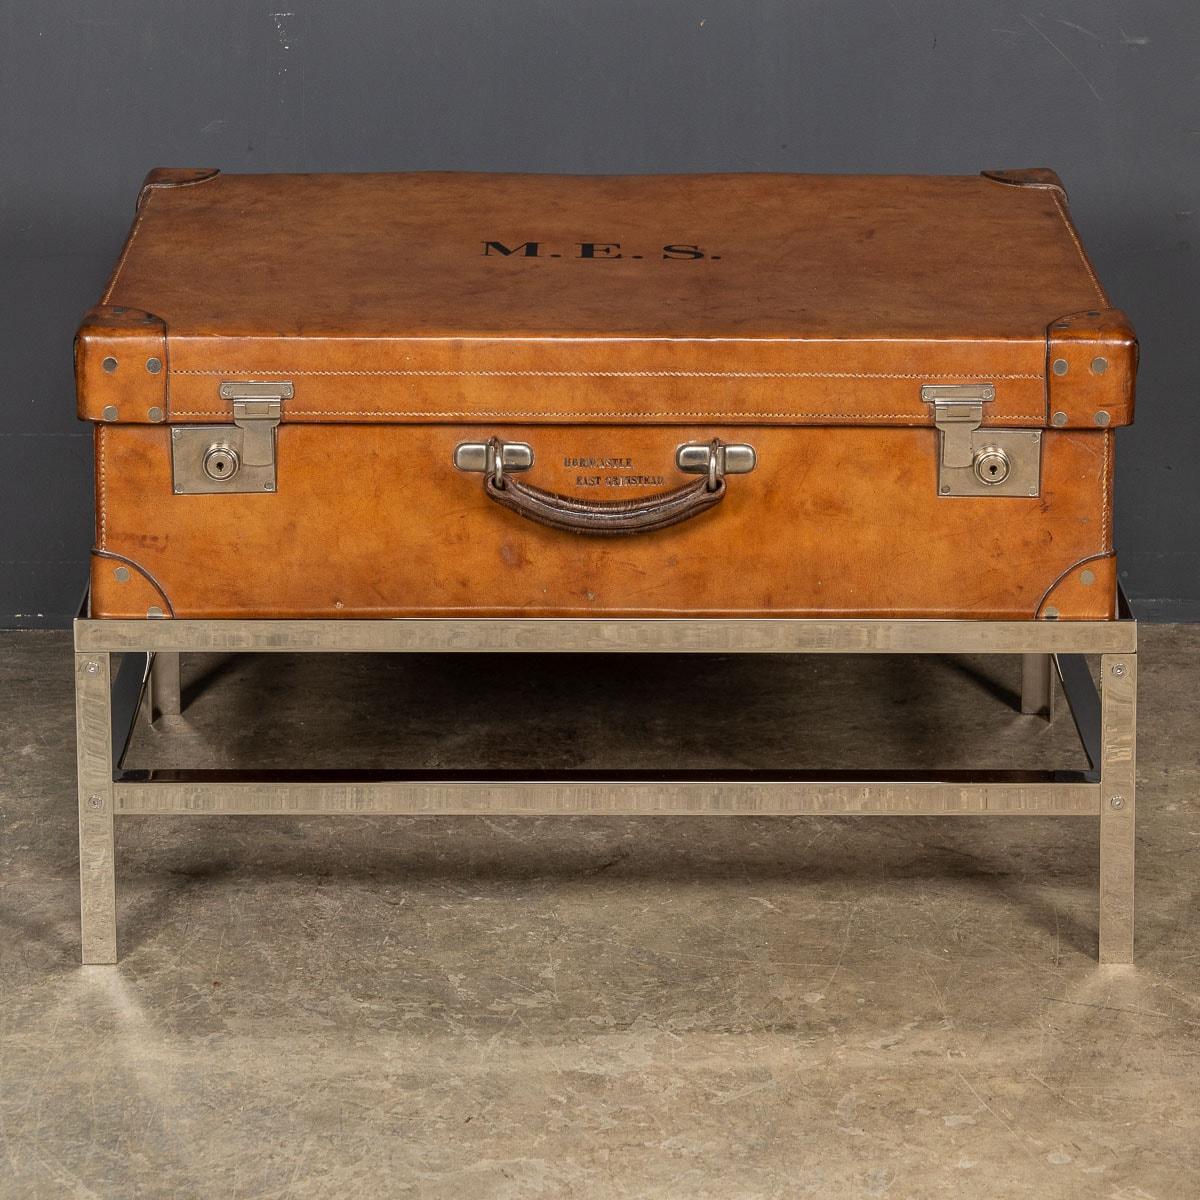 Antique early 20th Century trunk on stand, the inside is lined fabric in a rich burgundy colour, beautifully offsetting the outside natural tan hide colour of the trunk. This trunk comes with original polished metal locks and a leather handle.